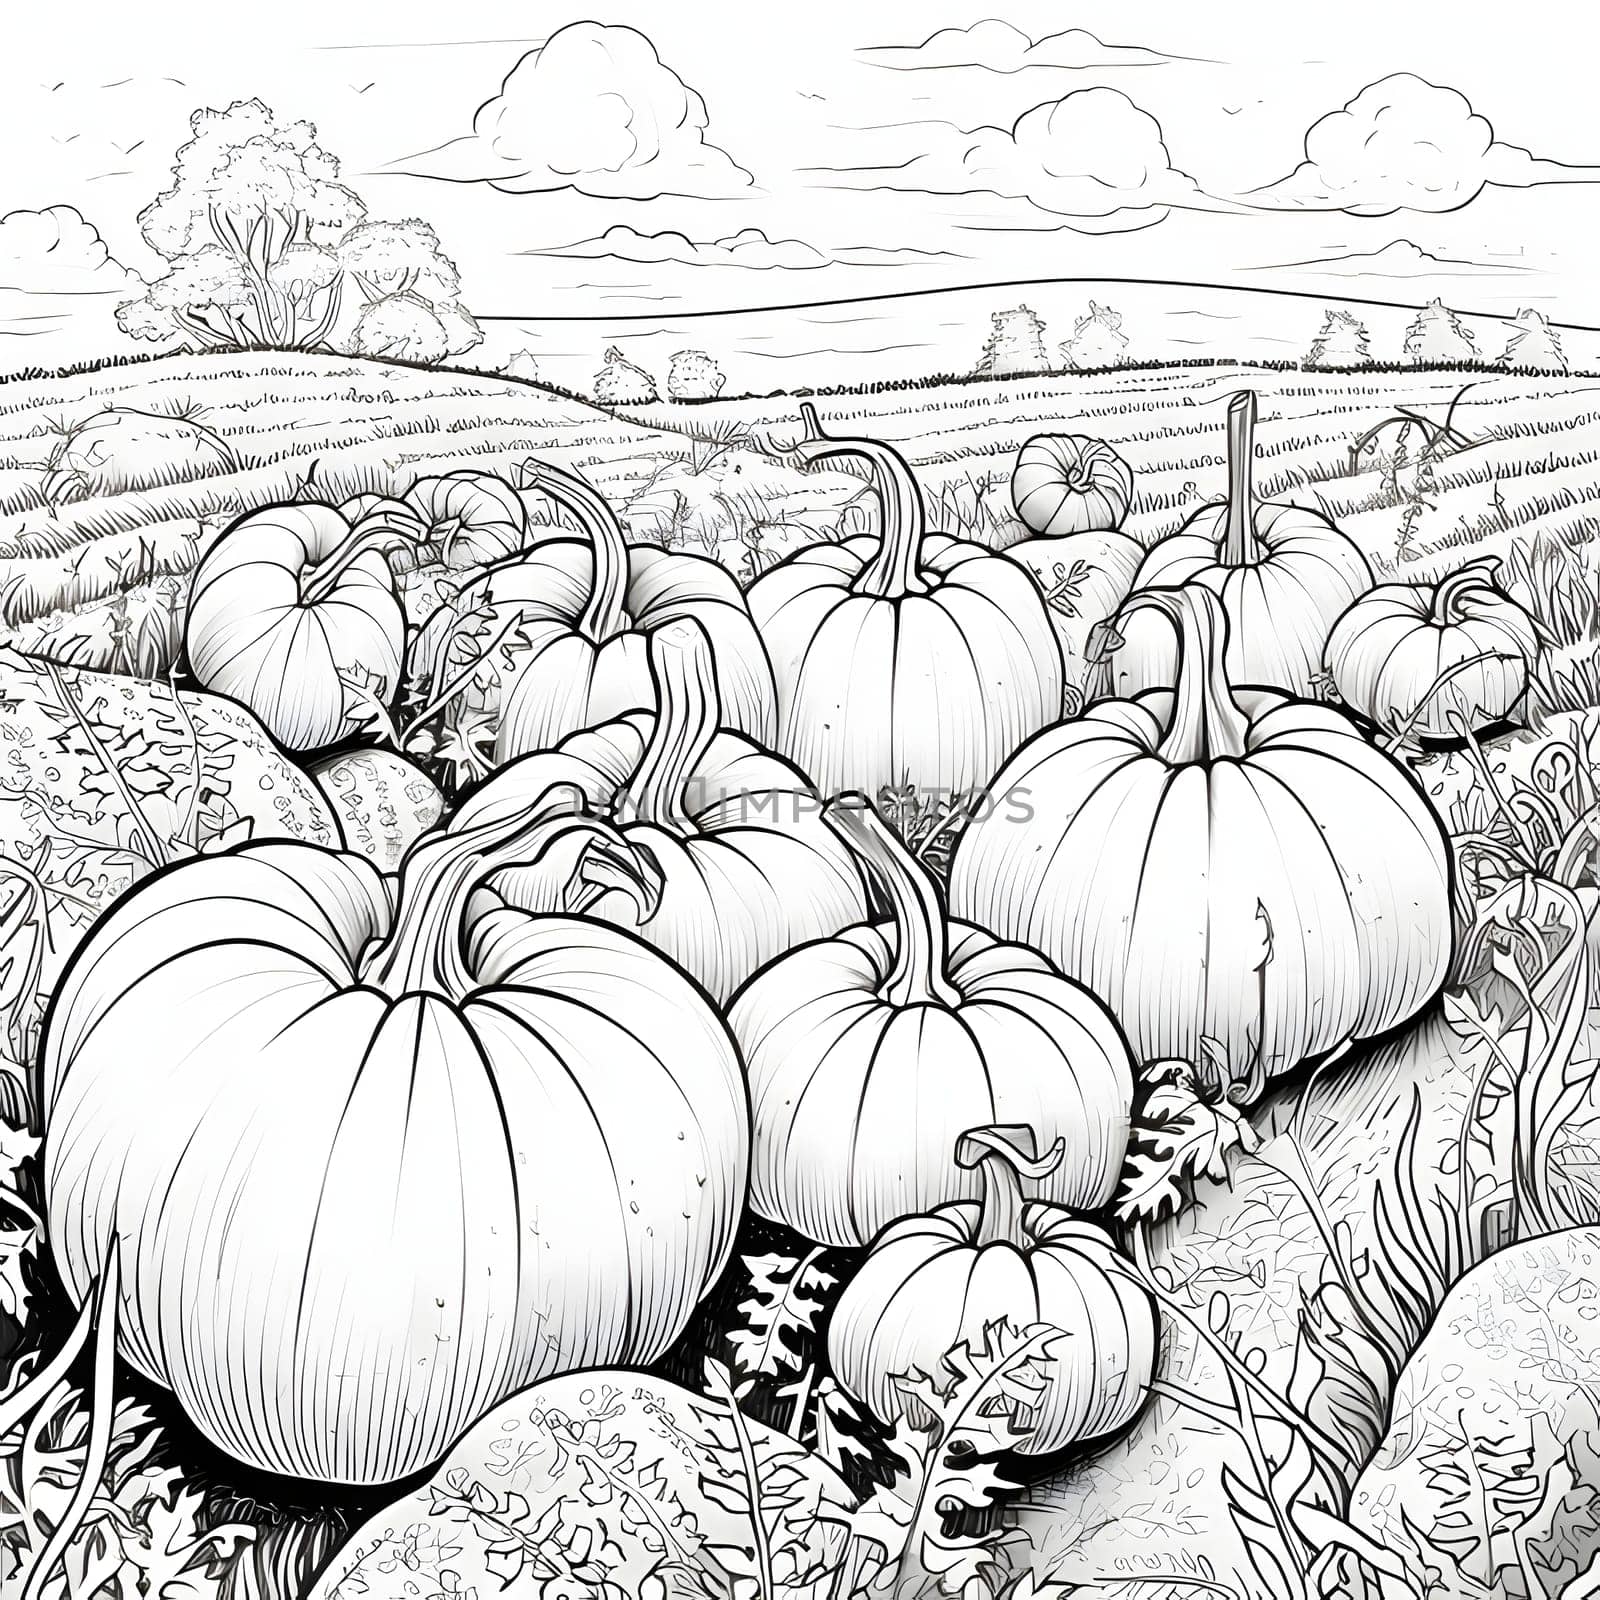 Black and White coloring book pumpkins in the field. Pumpkin as a dish of thanksgiving for the harvest, picture on a white isolated background. by ThemesS